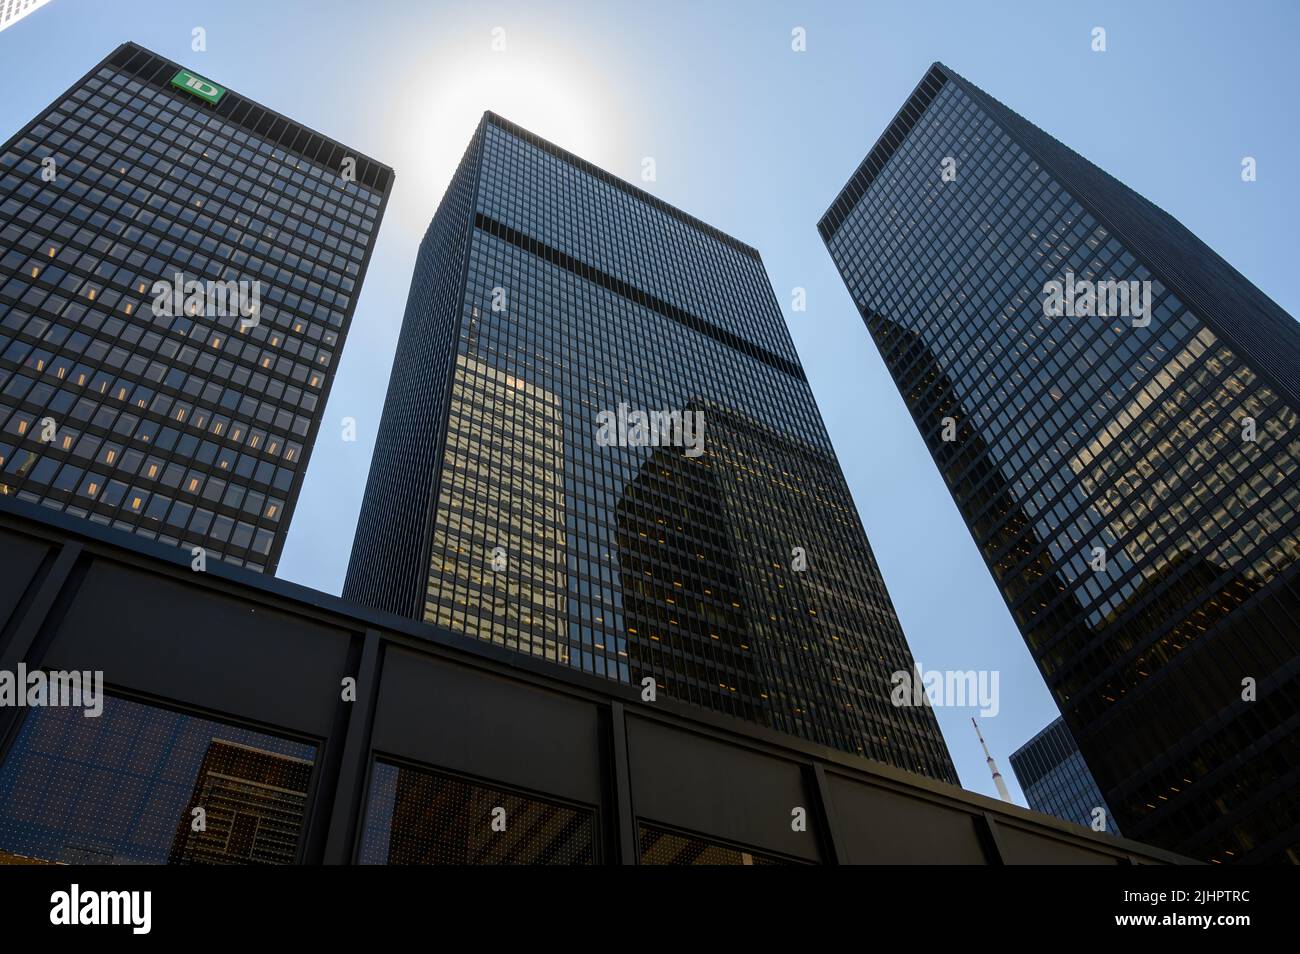 Looking up at the Toronto Dominion (TD) buildings with neighbouring skyscrapers reflected in the glass facades in financial district Toronto, Canada. Stock Photo